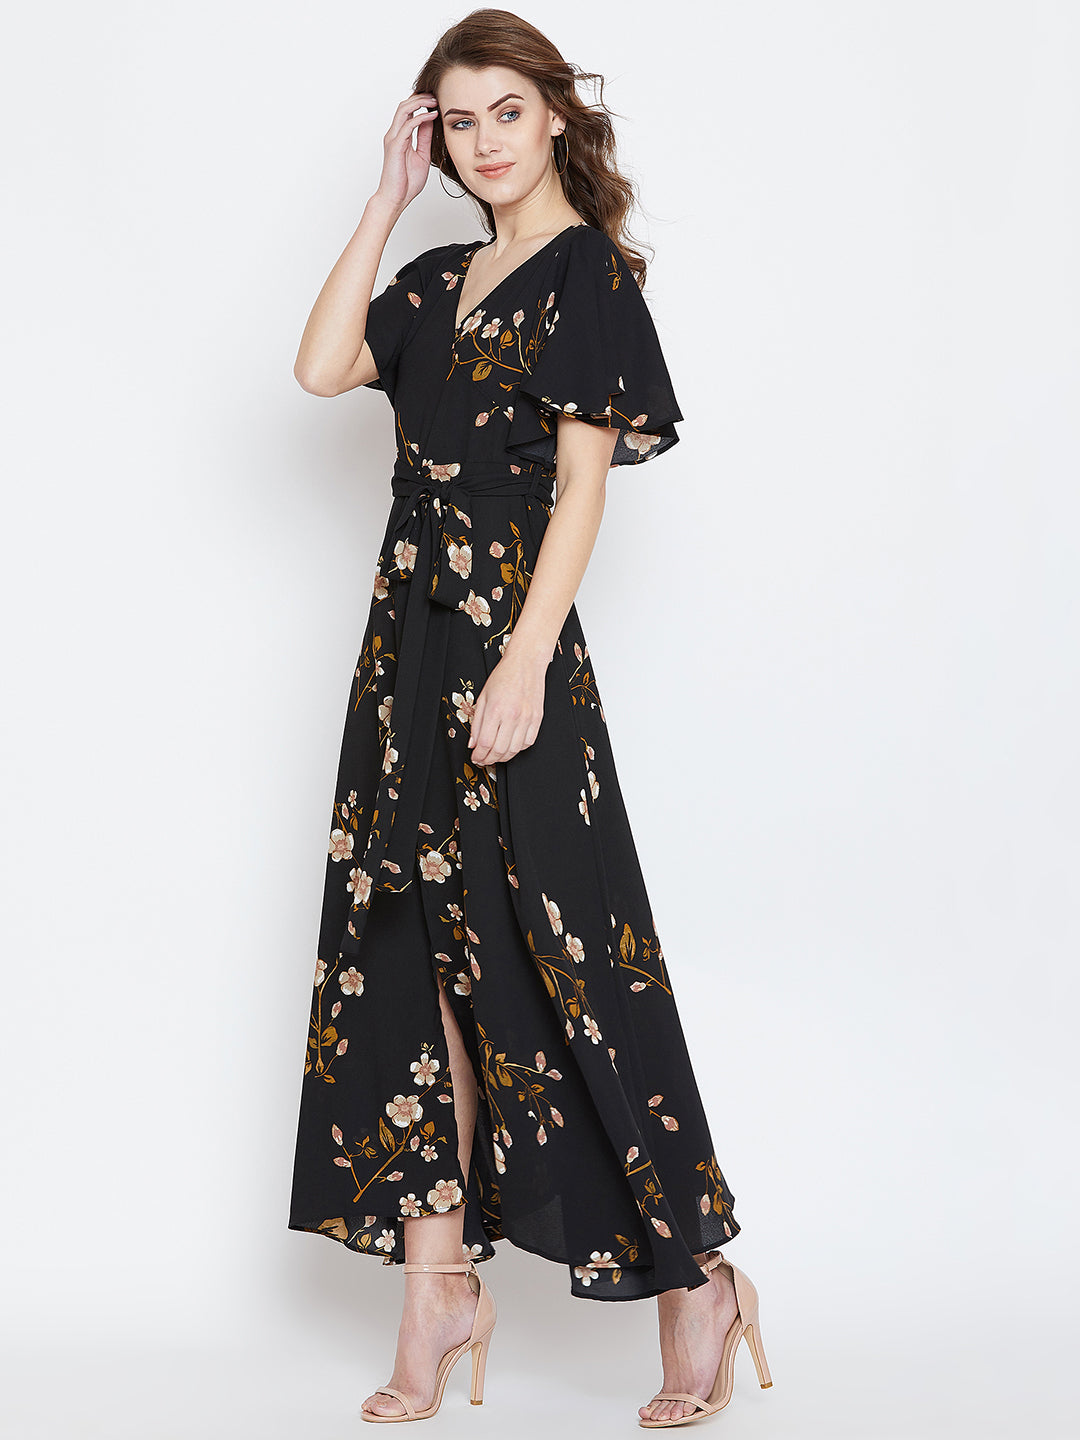 LASTINCH All Size's Black Floral Printed Wrap Style Maxi Dress